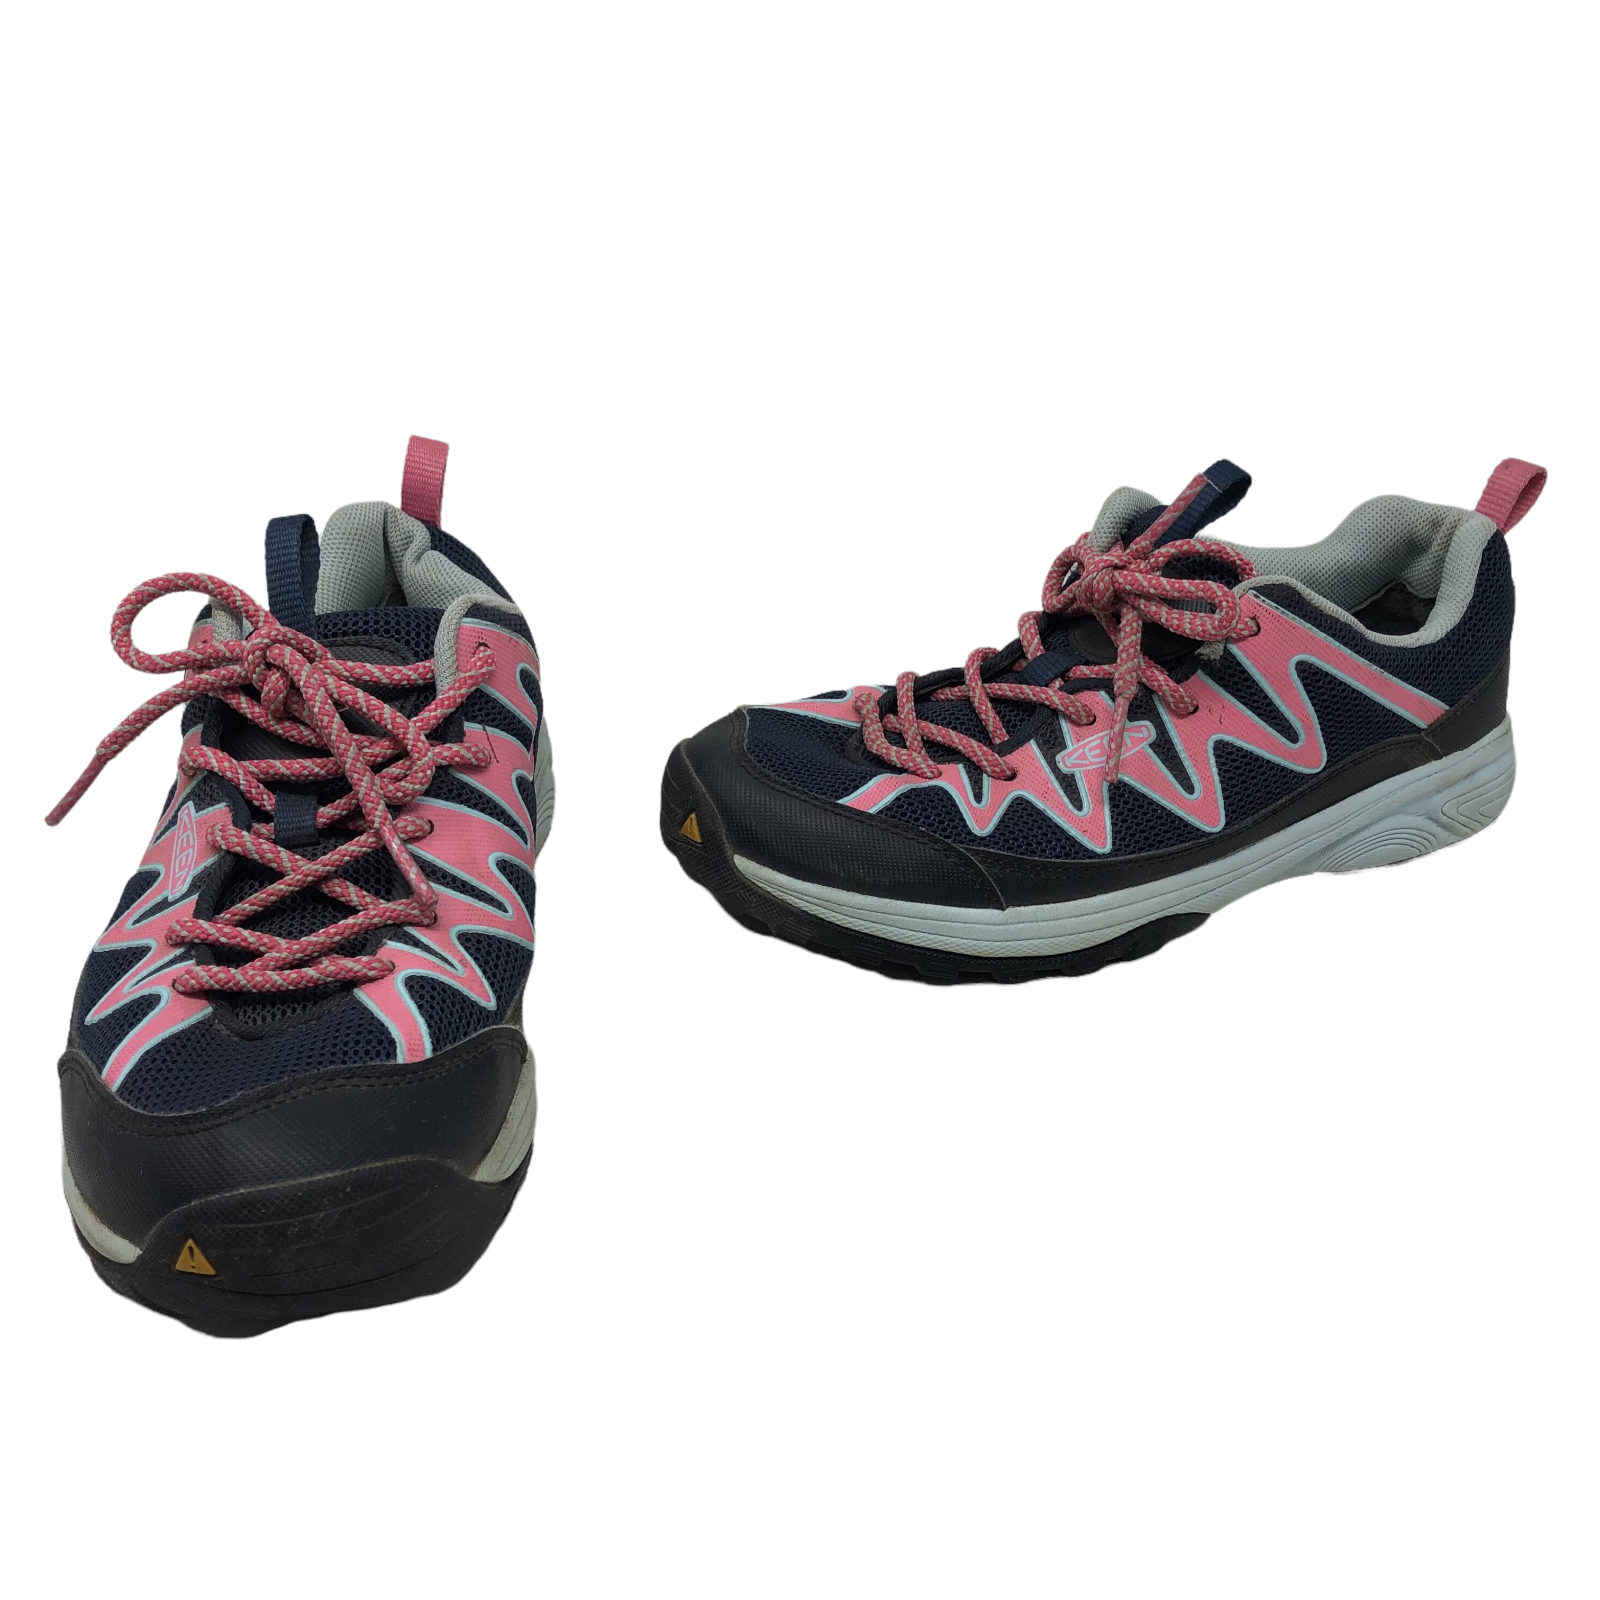 KEEN Youth Girls Hiking Blue Pink Sneakers Size 4 Trail 1013585 - $39.59